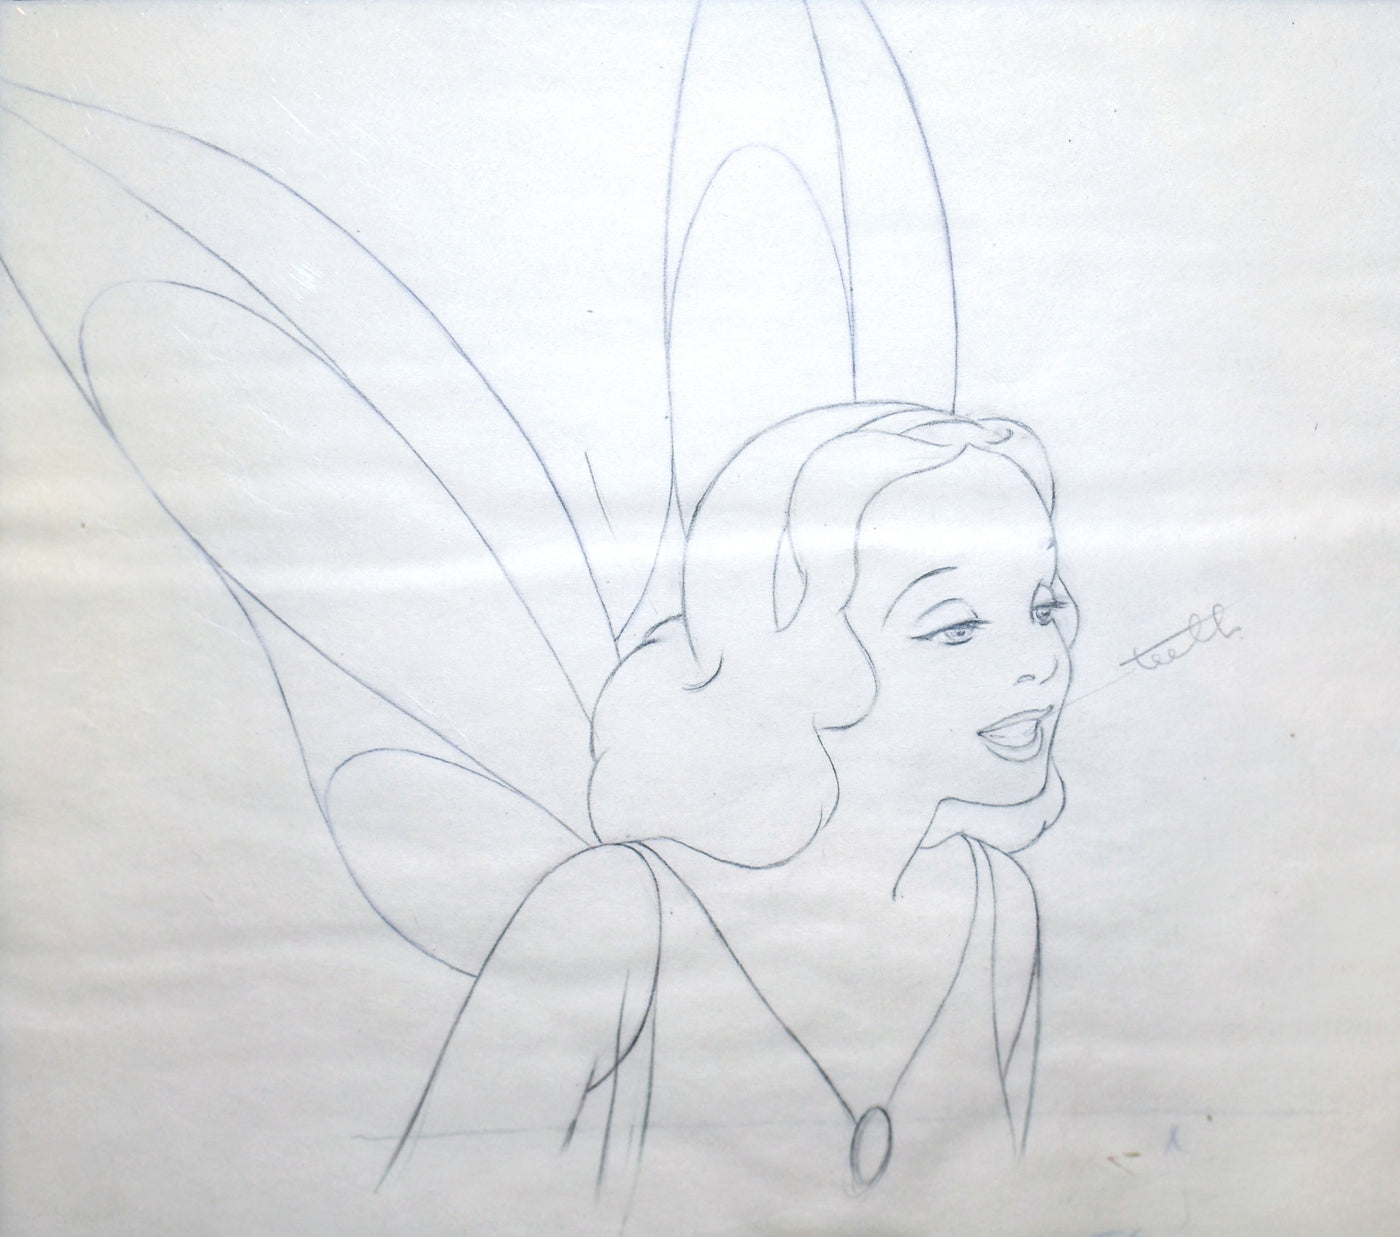 Original Walt Disney Production Drawing from Pinocchio featuring the Blue Fairy